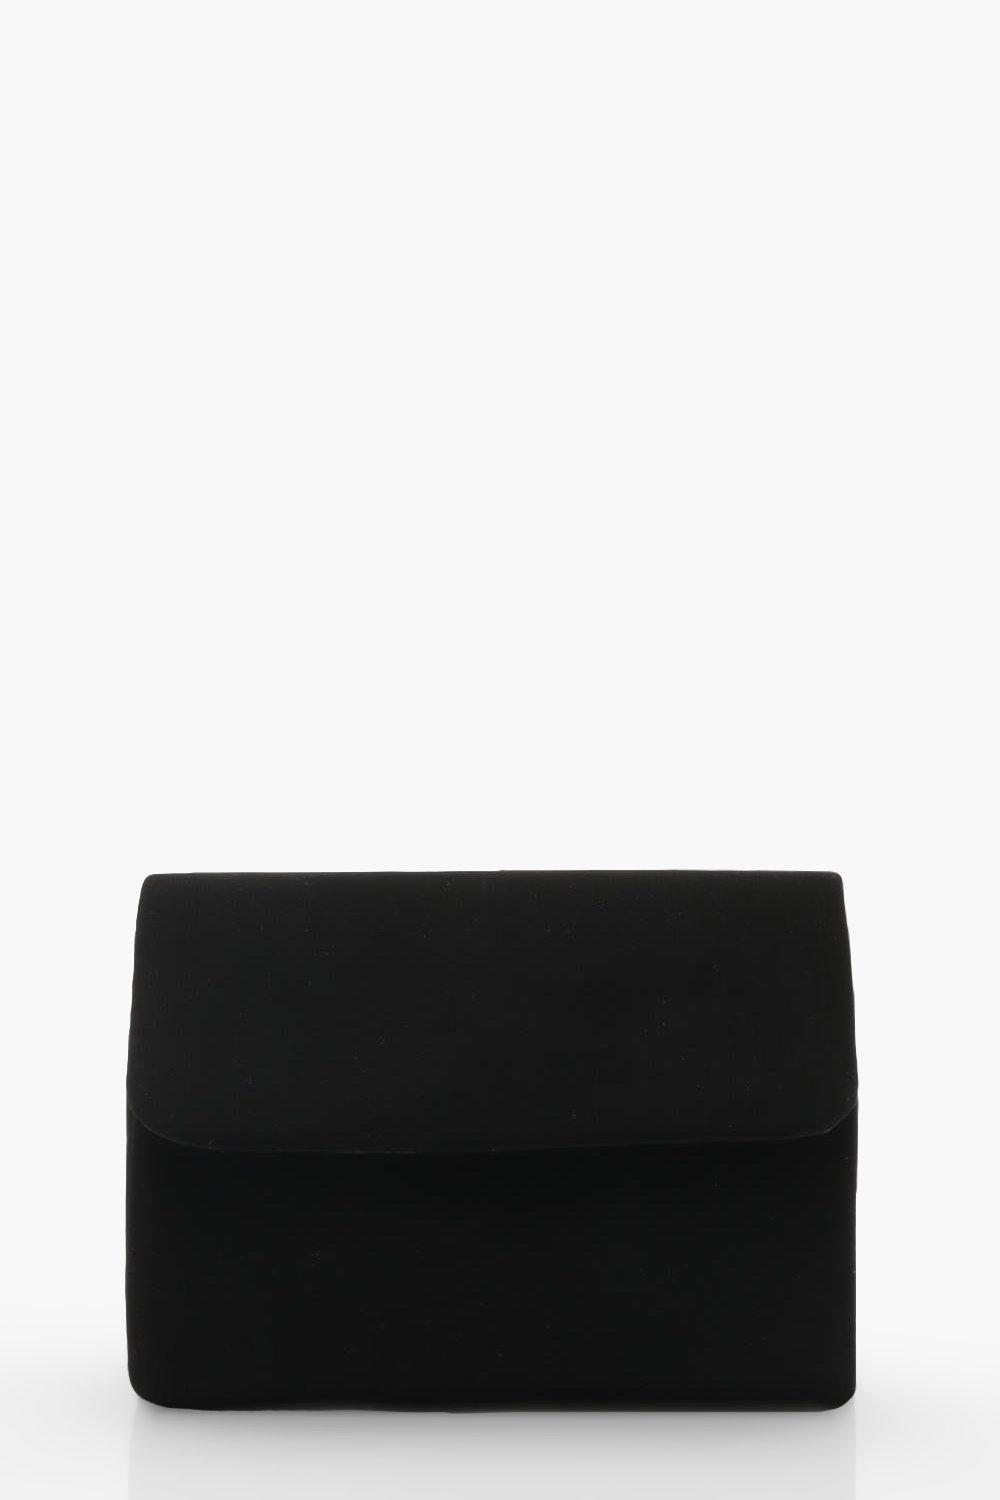 Boohoo Micro Mini Suedette Clutch And Chain Bag- Black  - Size: ONE SIZE